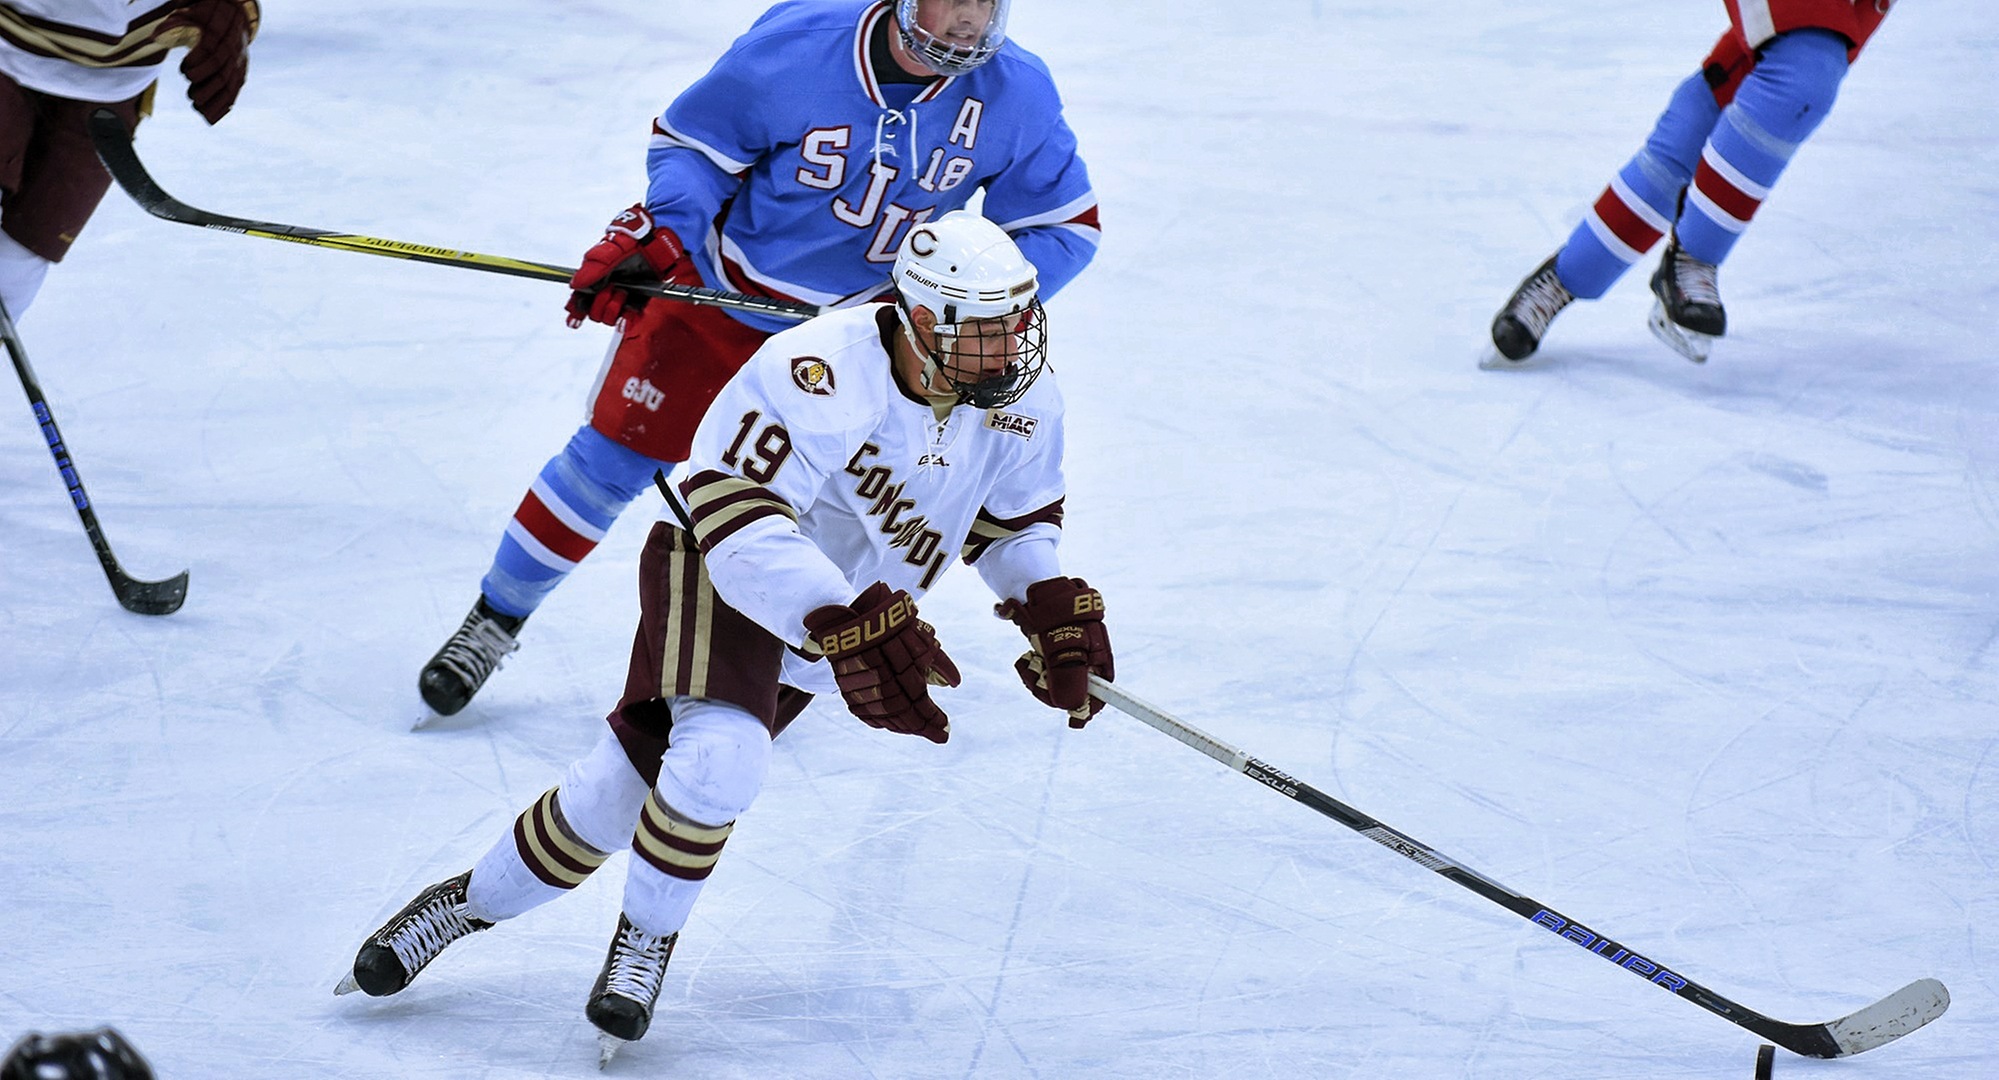 Junior All-American Tyler Bossert scored one of three power-play goals in the Cobbers' 4-2 win at St. John's.